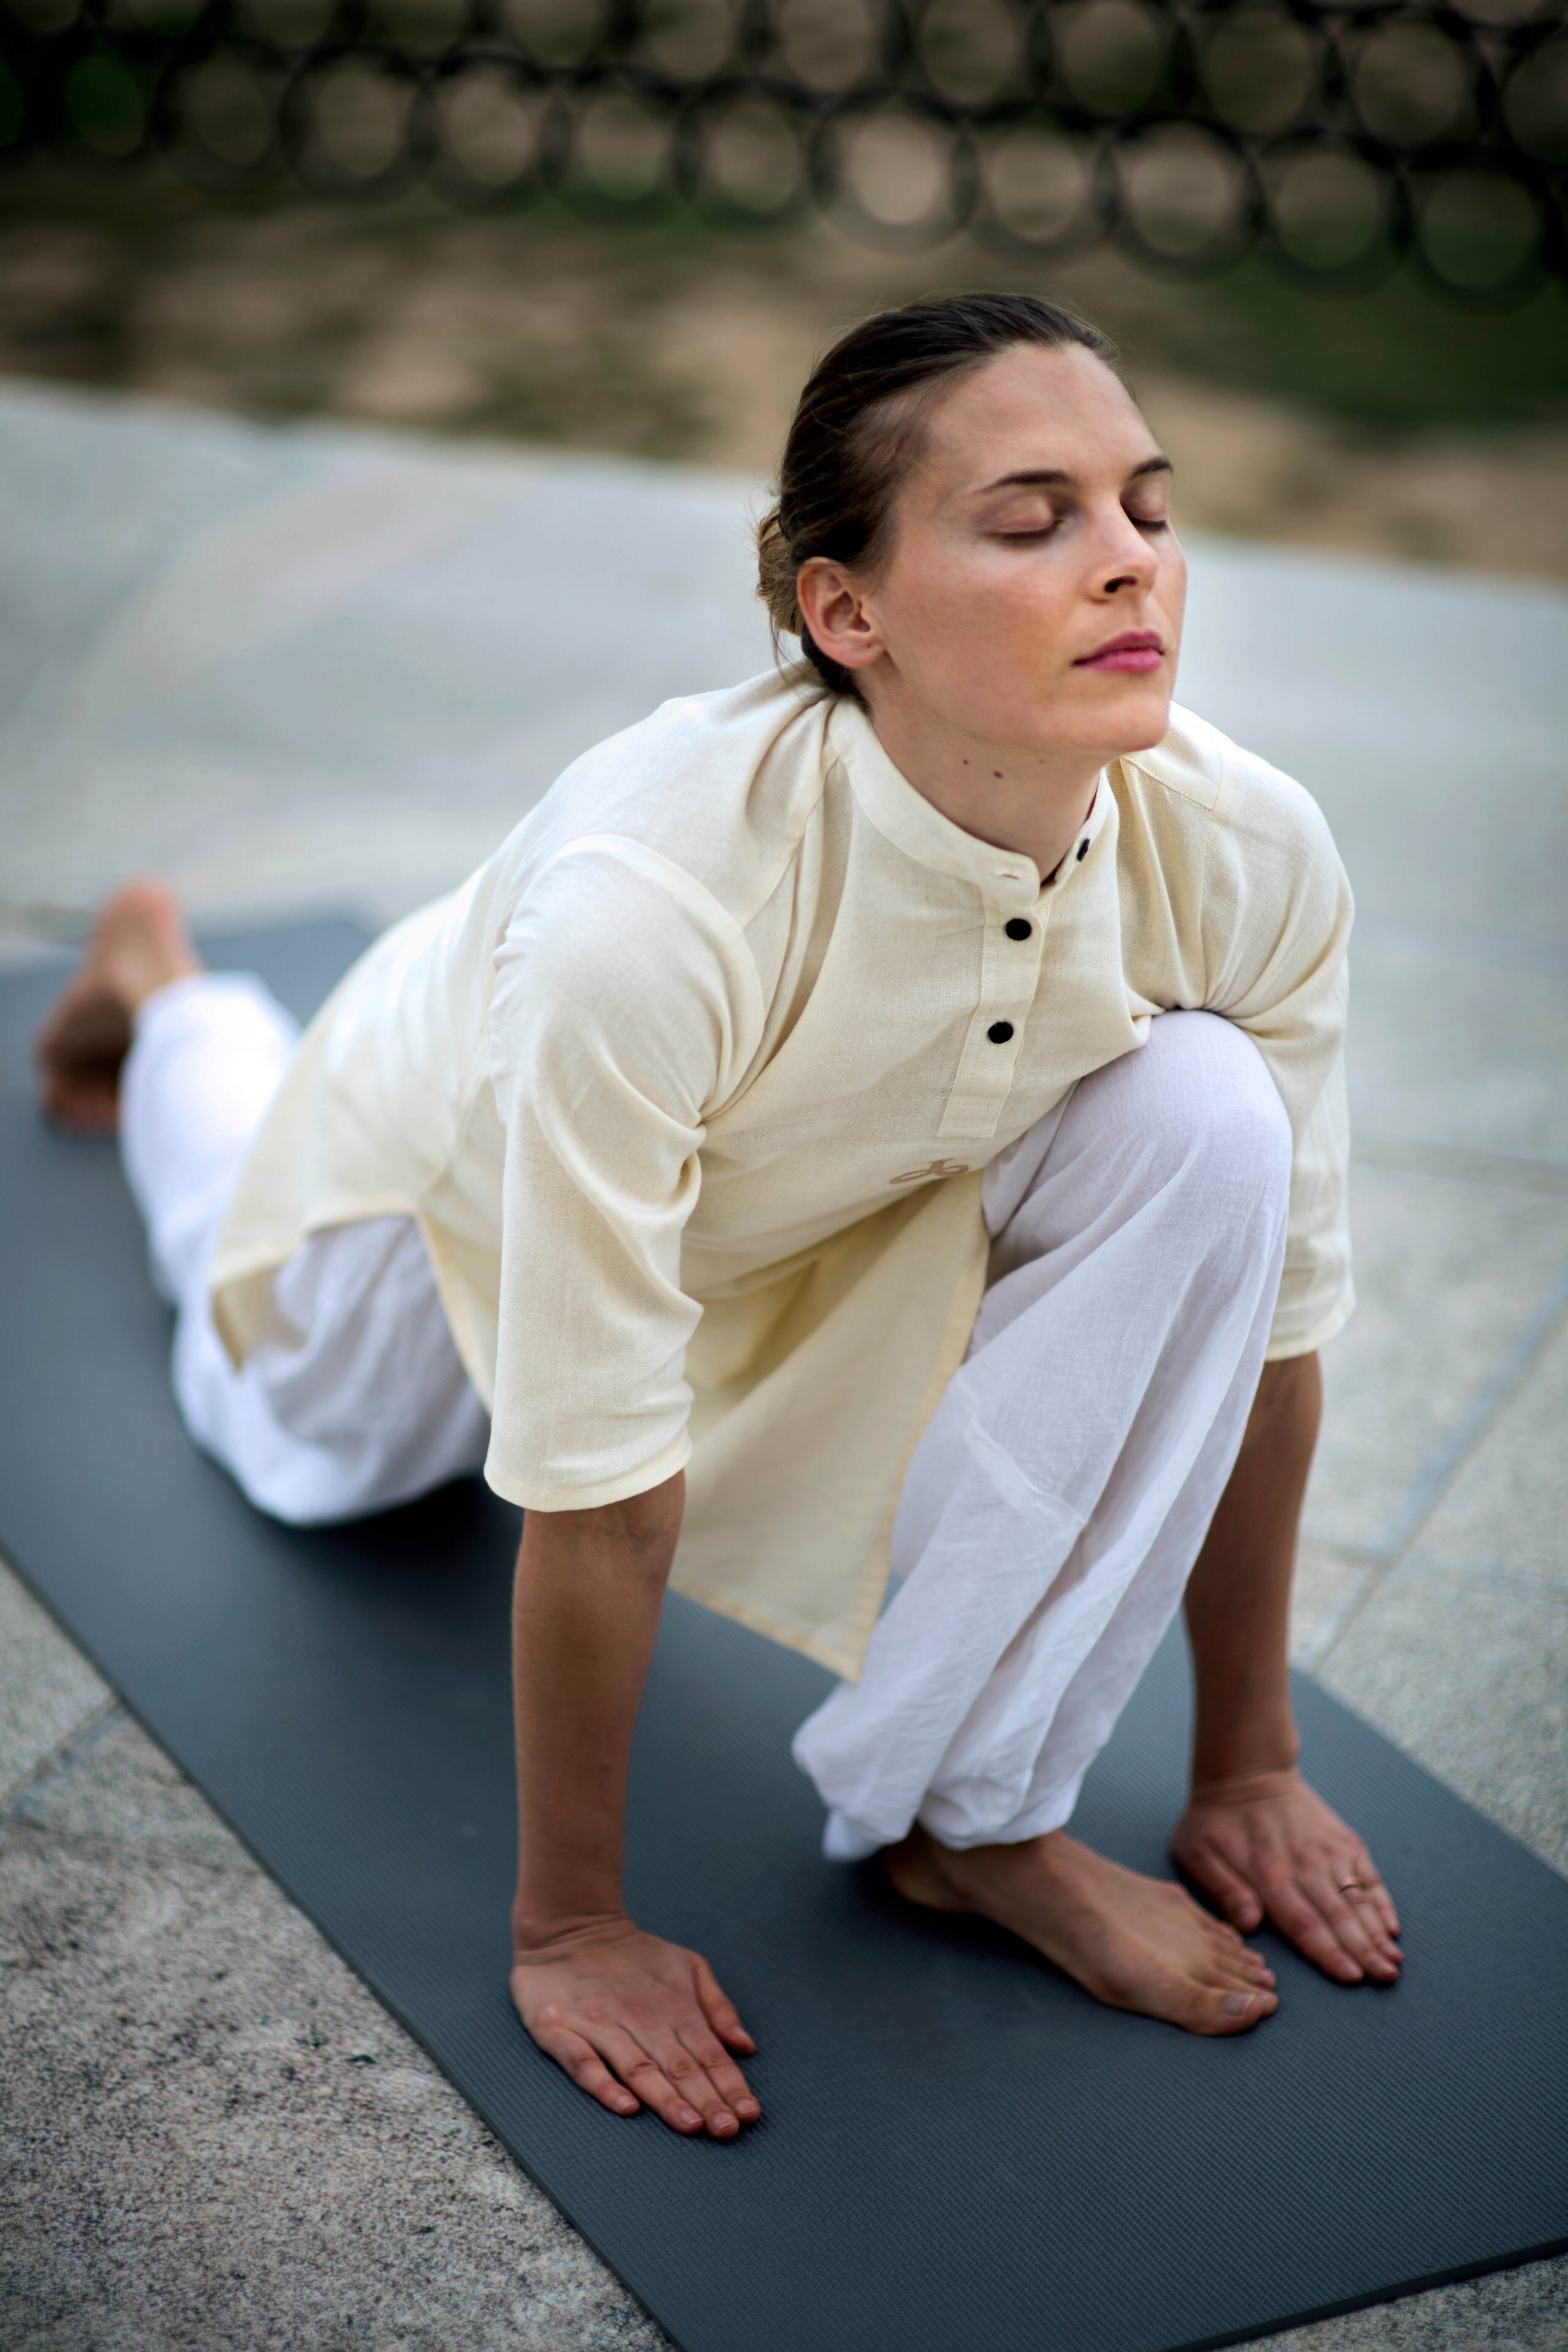 Yoga: Physiotherapy for mind